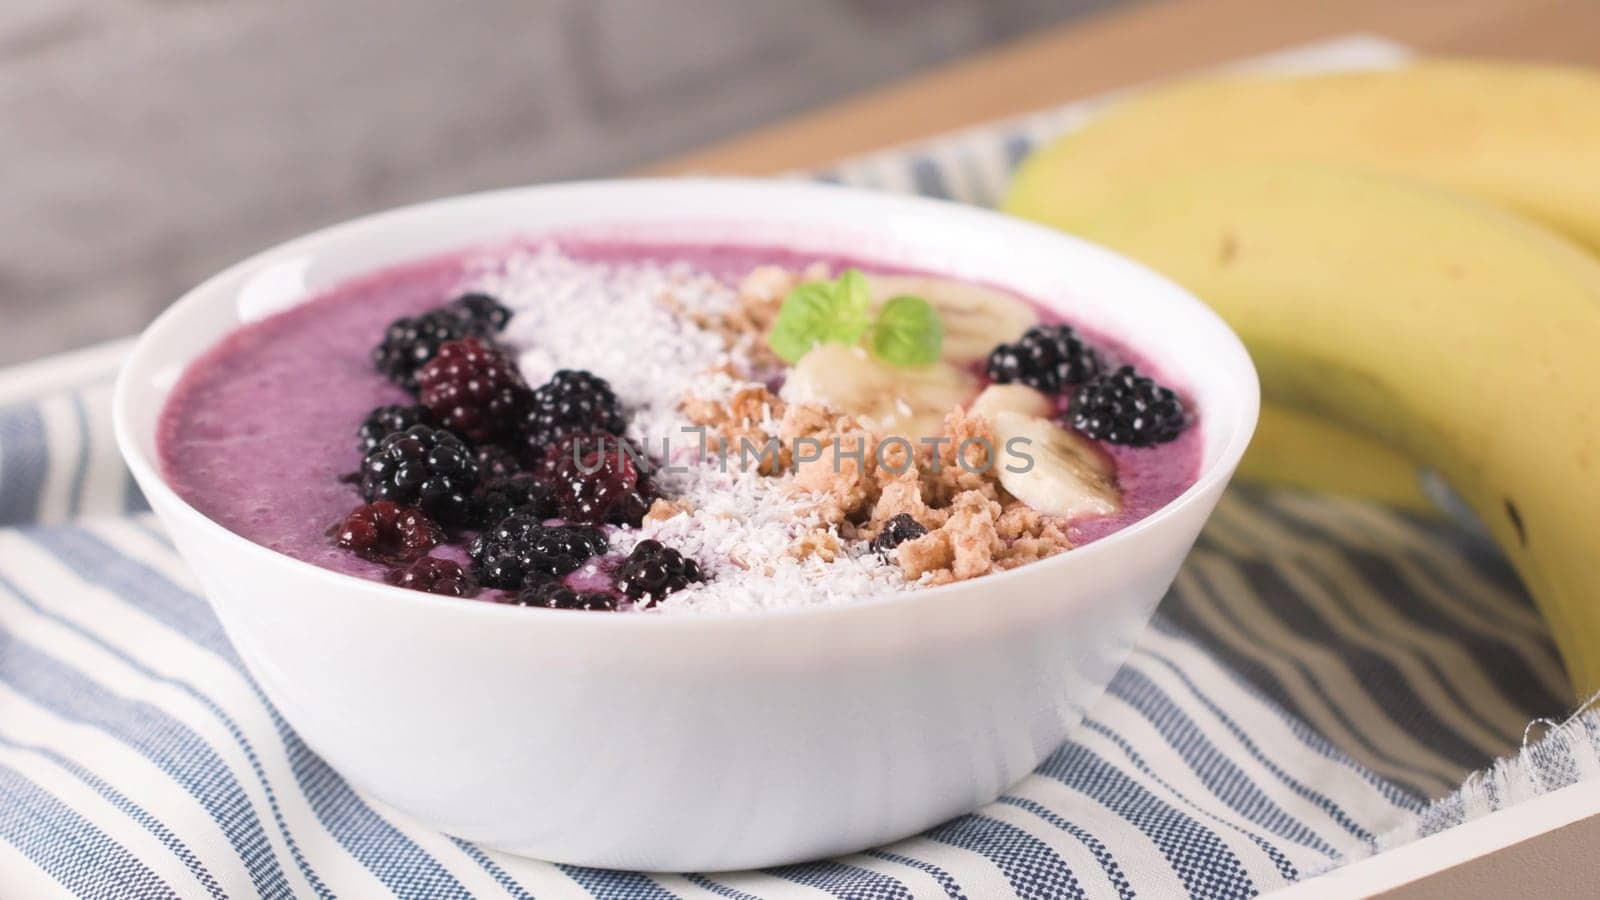 Blueberry smoothie bowl by homydesign